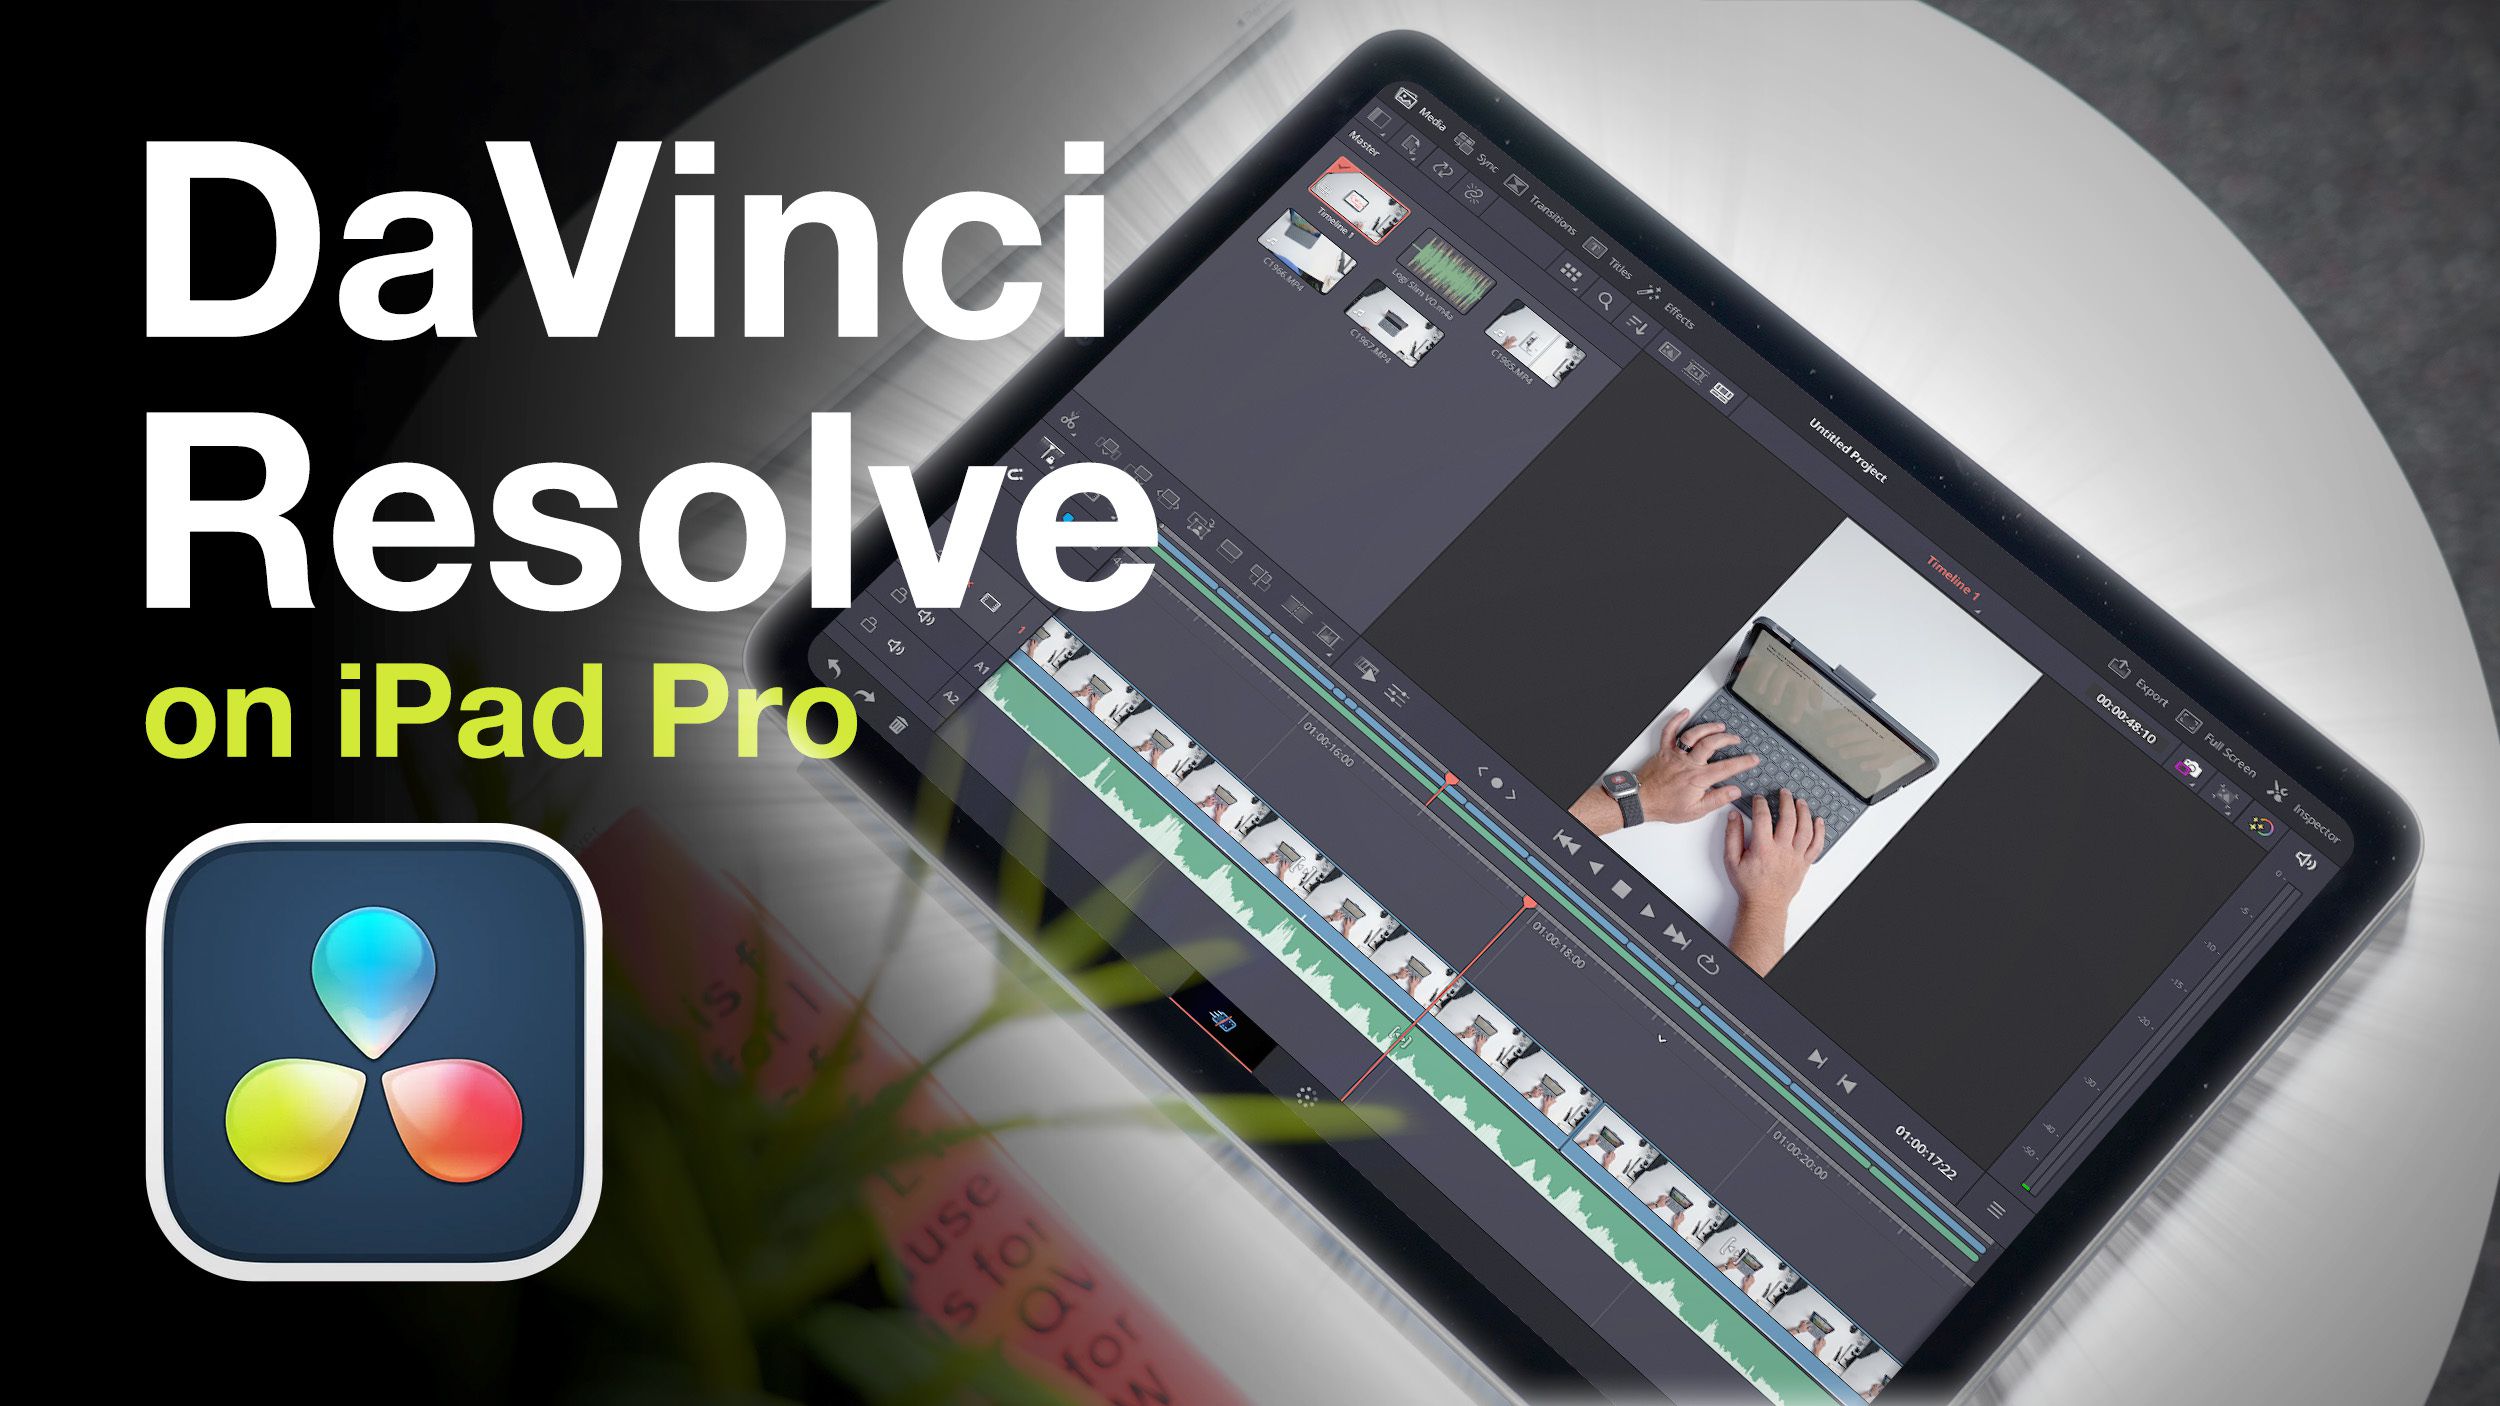 Hands-On With the DaVinci Resolve Beta for iPad